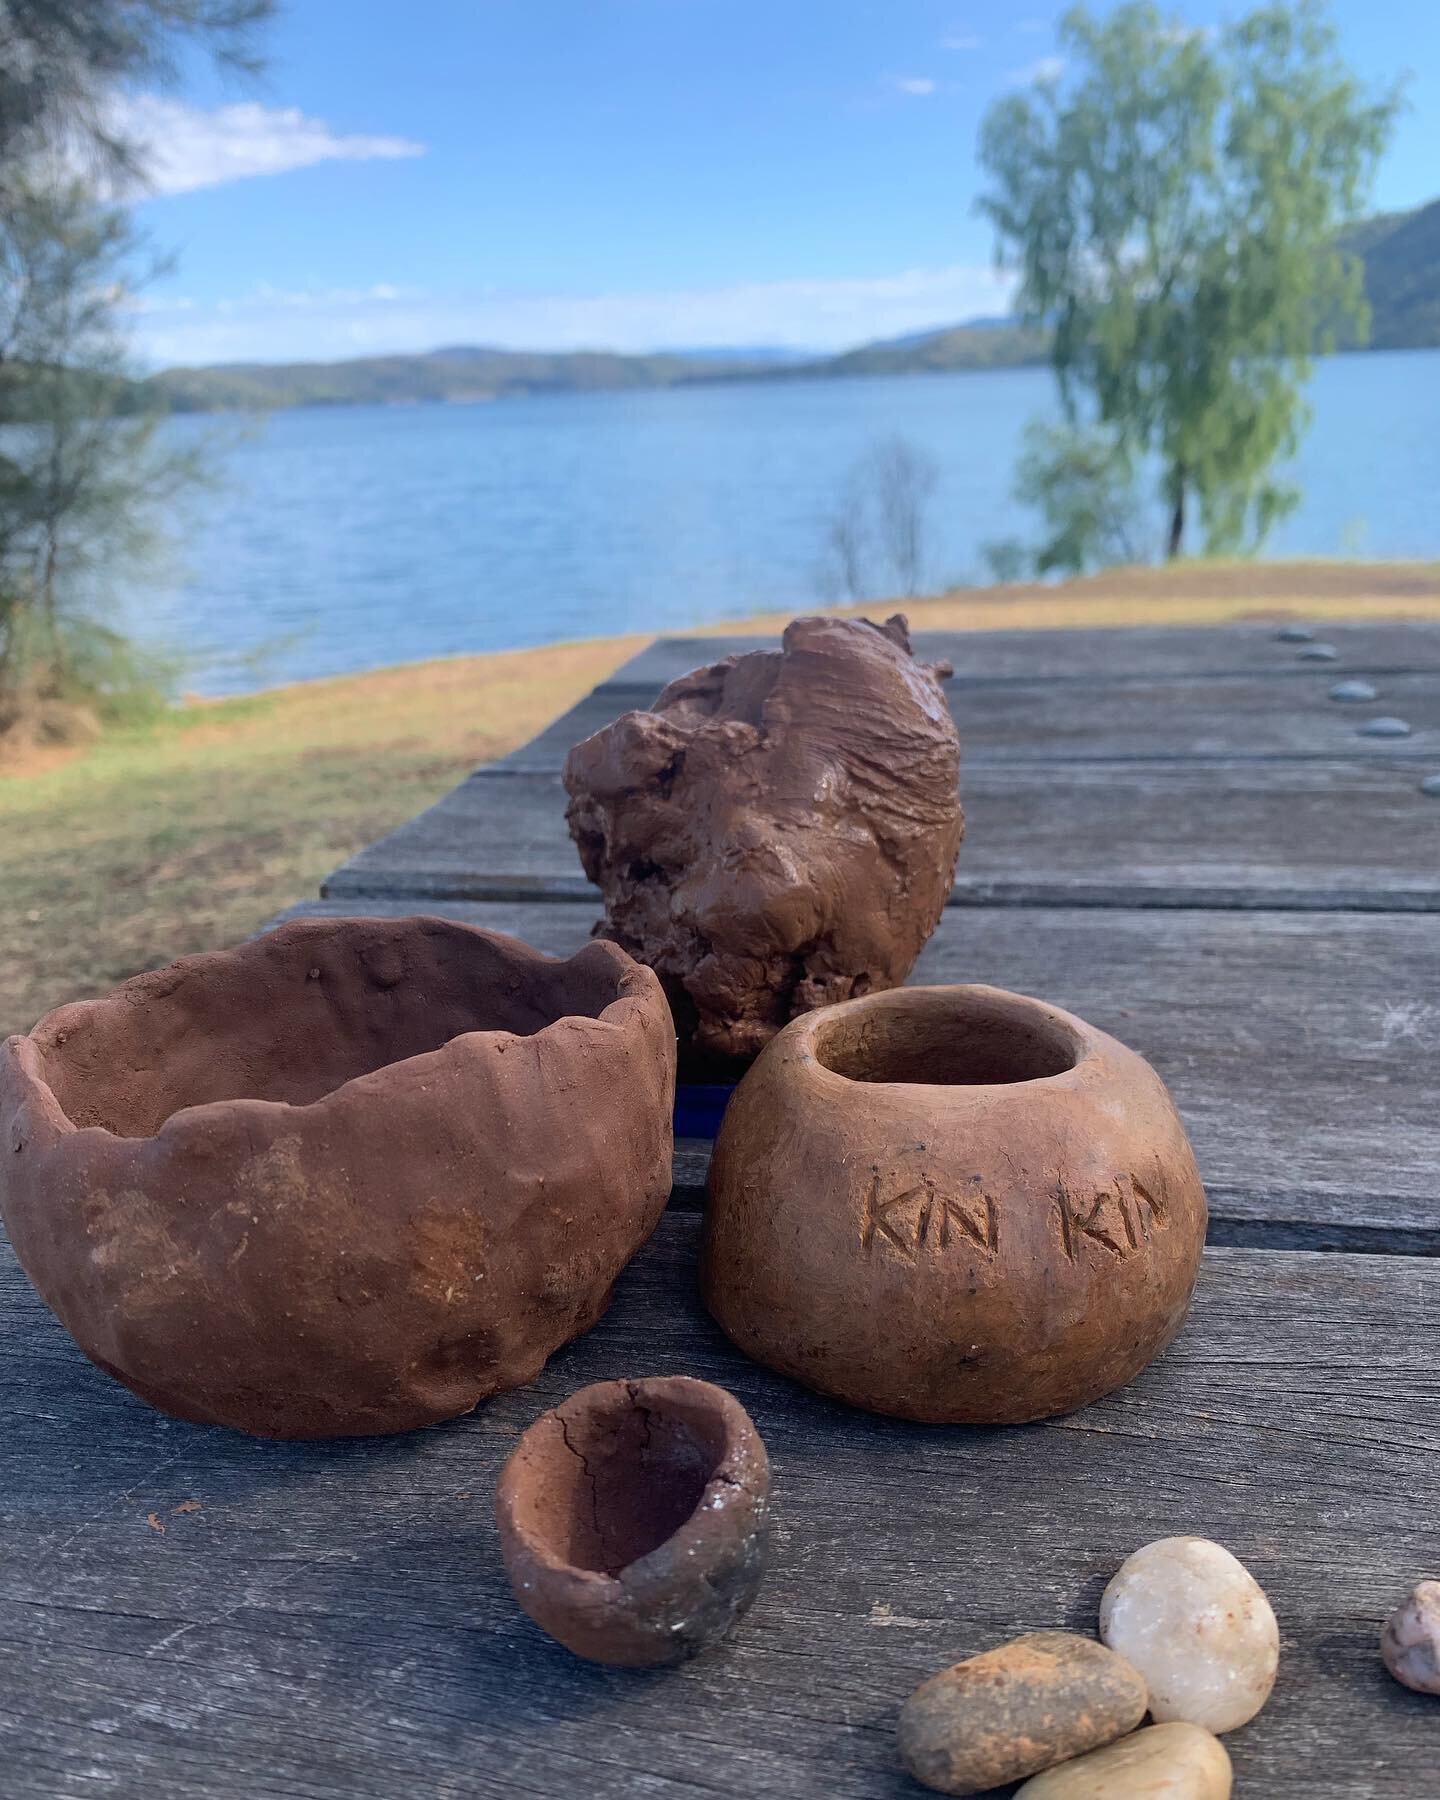 Potting my way down under . I&rsquo;ve been digging up clay as we travel around Oz , forming pots and firing in open fires &hellip; so wonderful to have this opportunity!